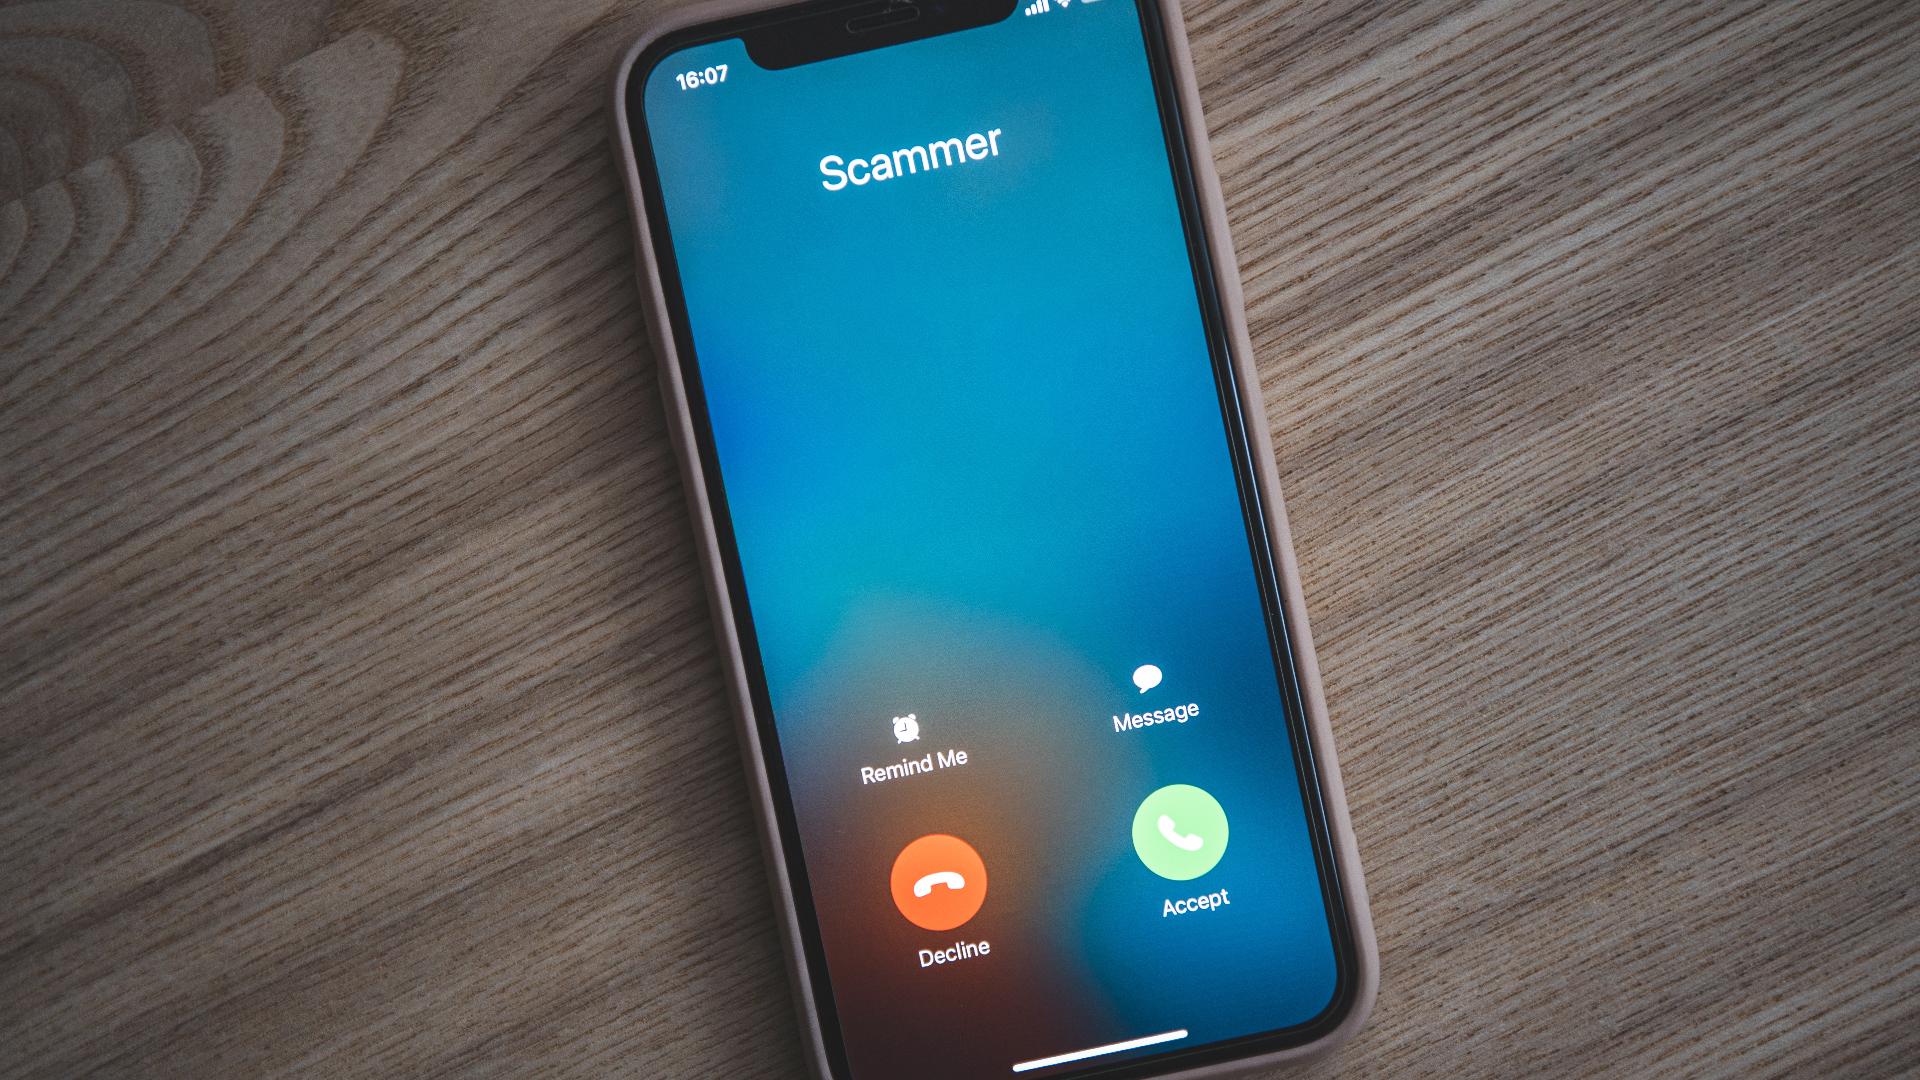 Fishers Police say the caller claims they need to talk to you about an urgent matter, but they need your personal information and money first.